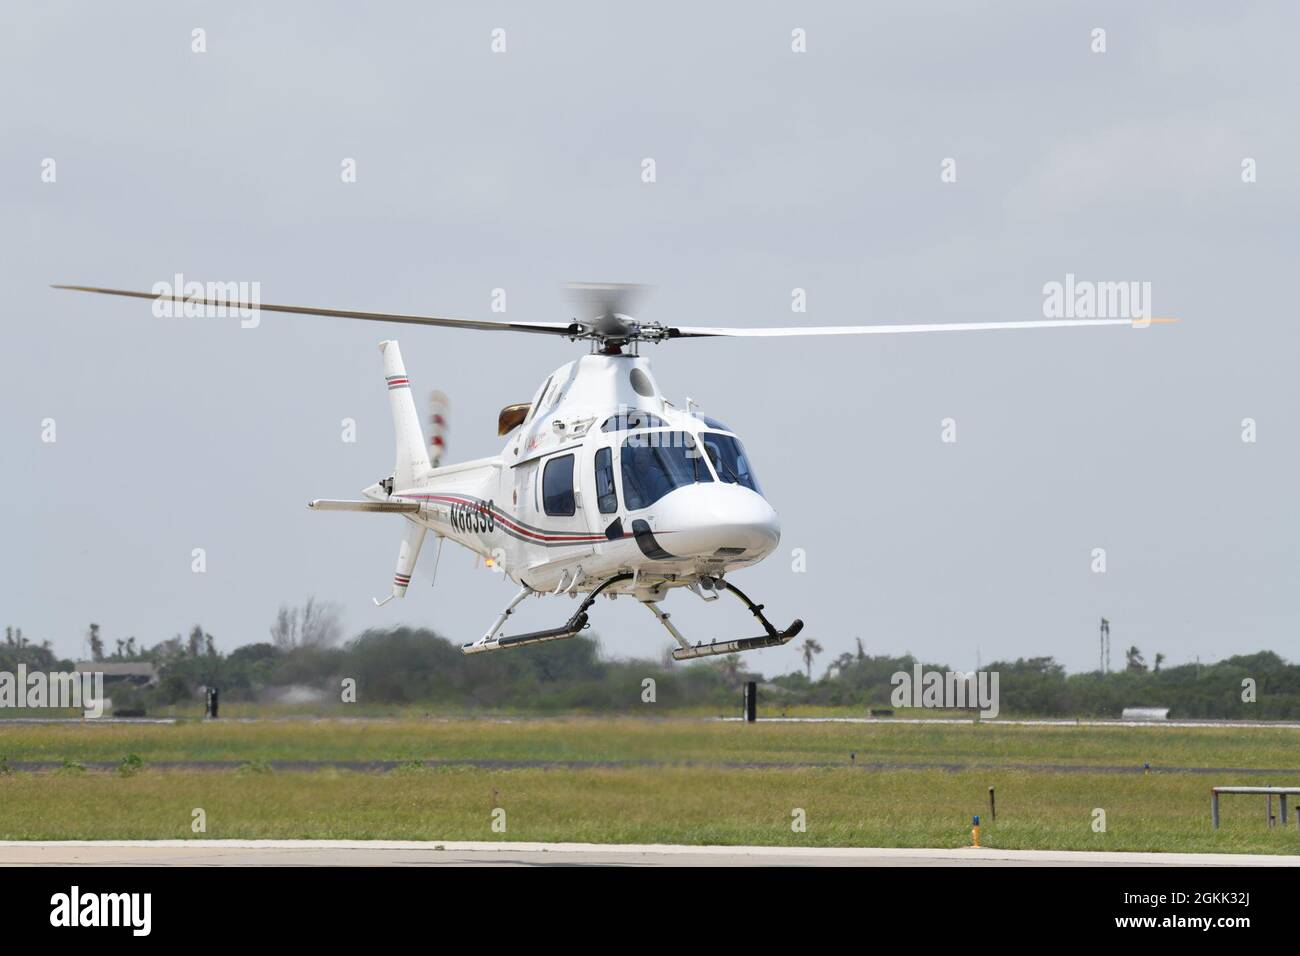 CORPUS CHRISTI, Texas (May 11, 2021)  - A TH-119 helicopter piloted by Chief of Naval Air Training Chief of Staff Capt. Scott Starkey lands at Naval Air Station Corpus Christi, May 11. The TH-119 is the commercially available variant of the TH-73A, which will replace the TH-57 Sea Ranger to meet advanced rotary wing and intermediate tilt-rotor training requirements for the Navy, Marine Corps and Coast Guard through 2050. Stock Photo